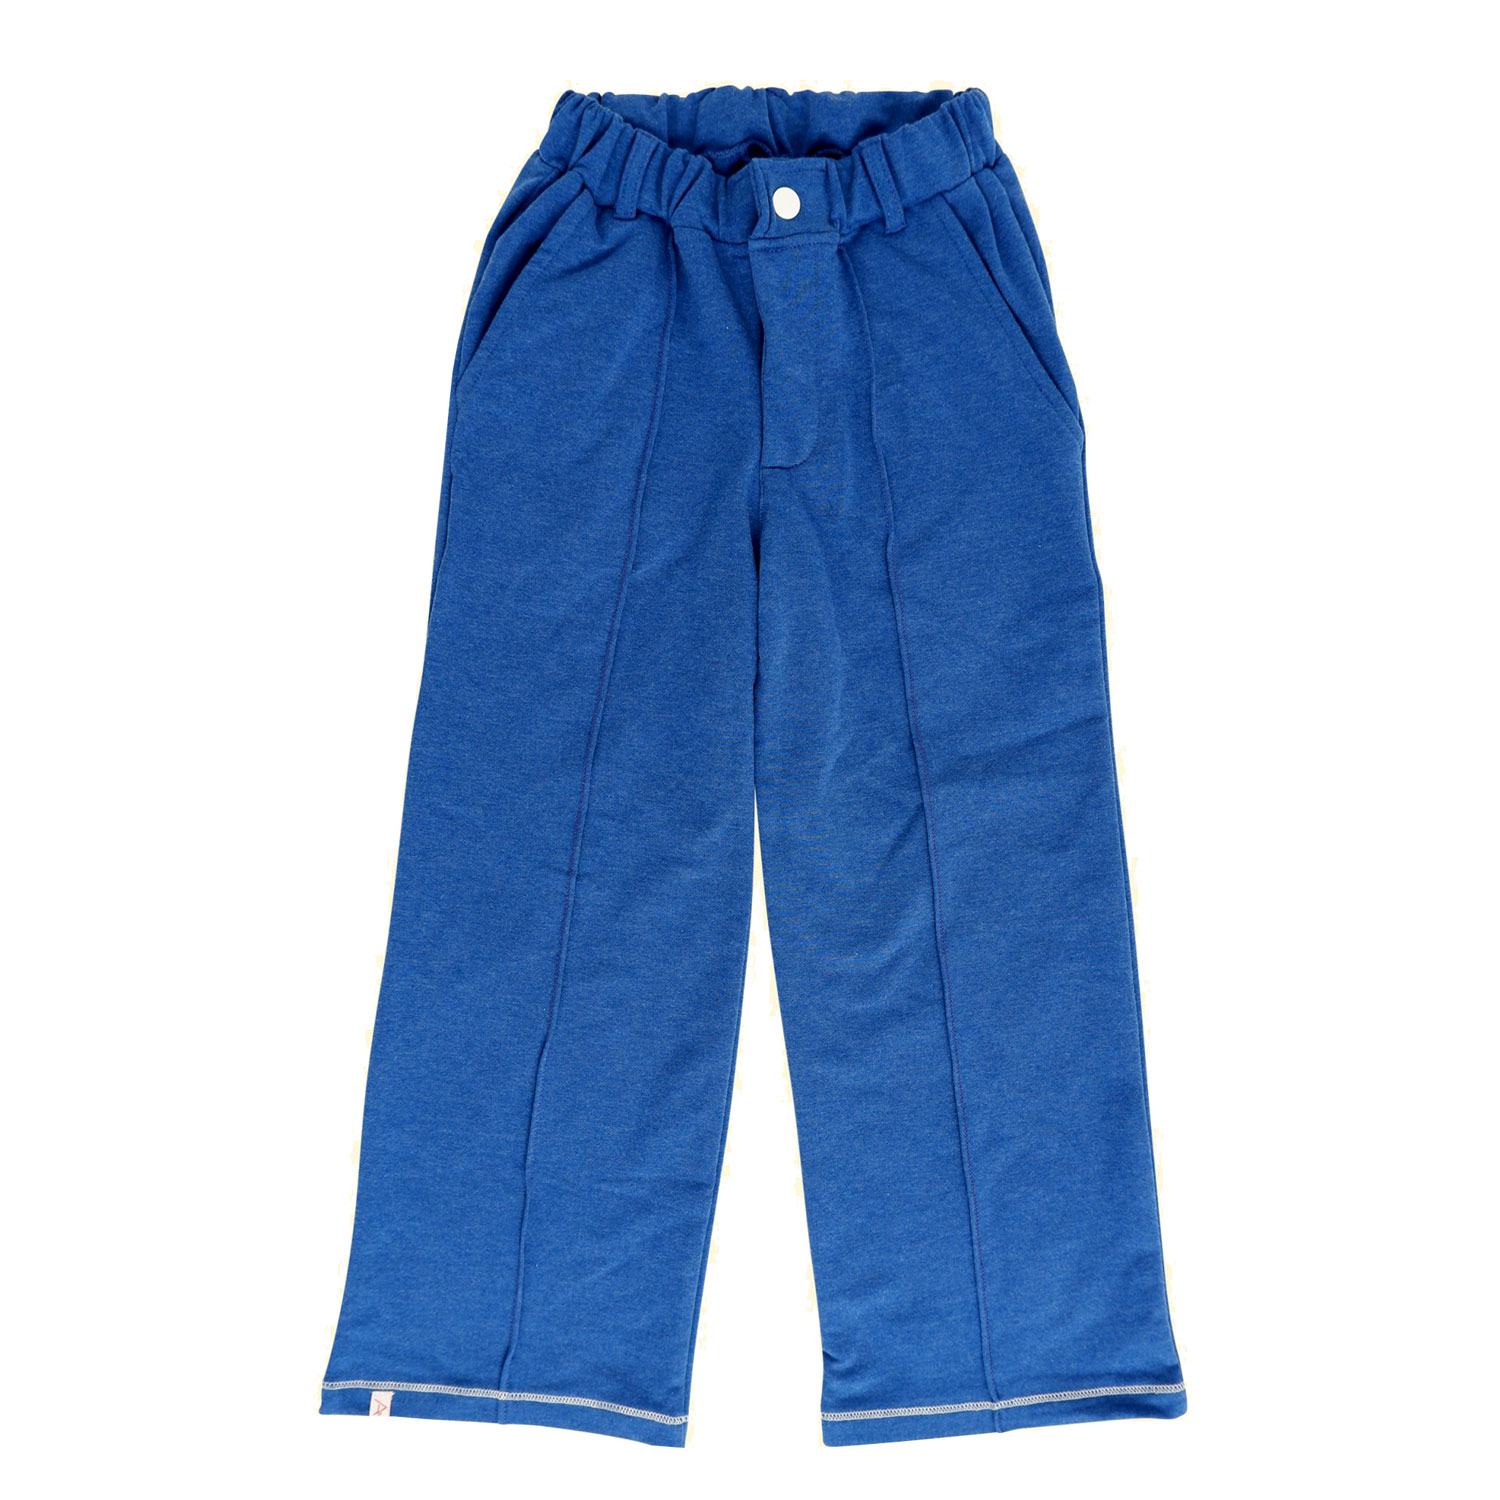 Blowing In The Wind: Retro Wide Leg Pants for Kids in Bright Blue